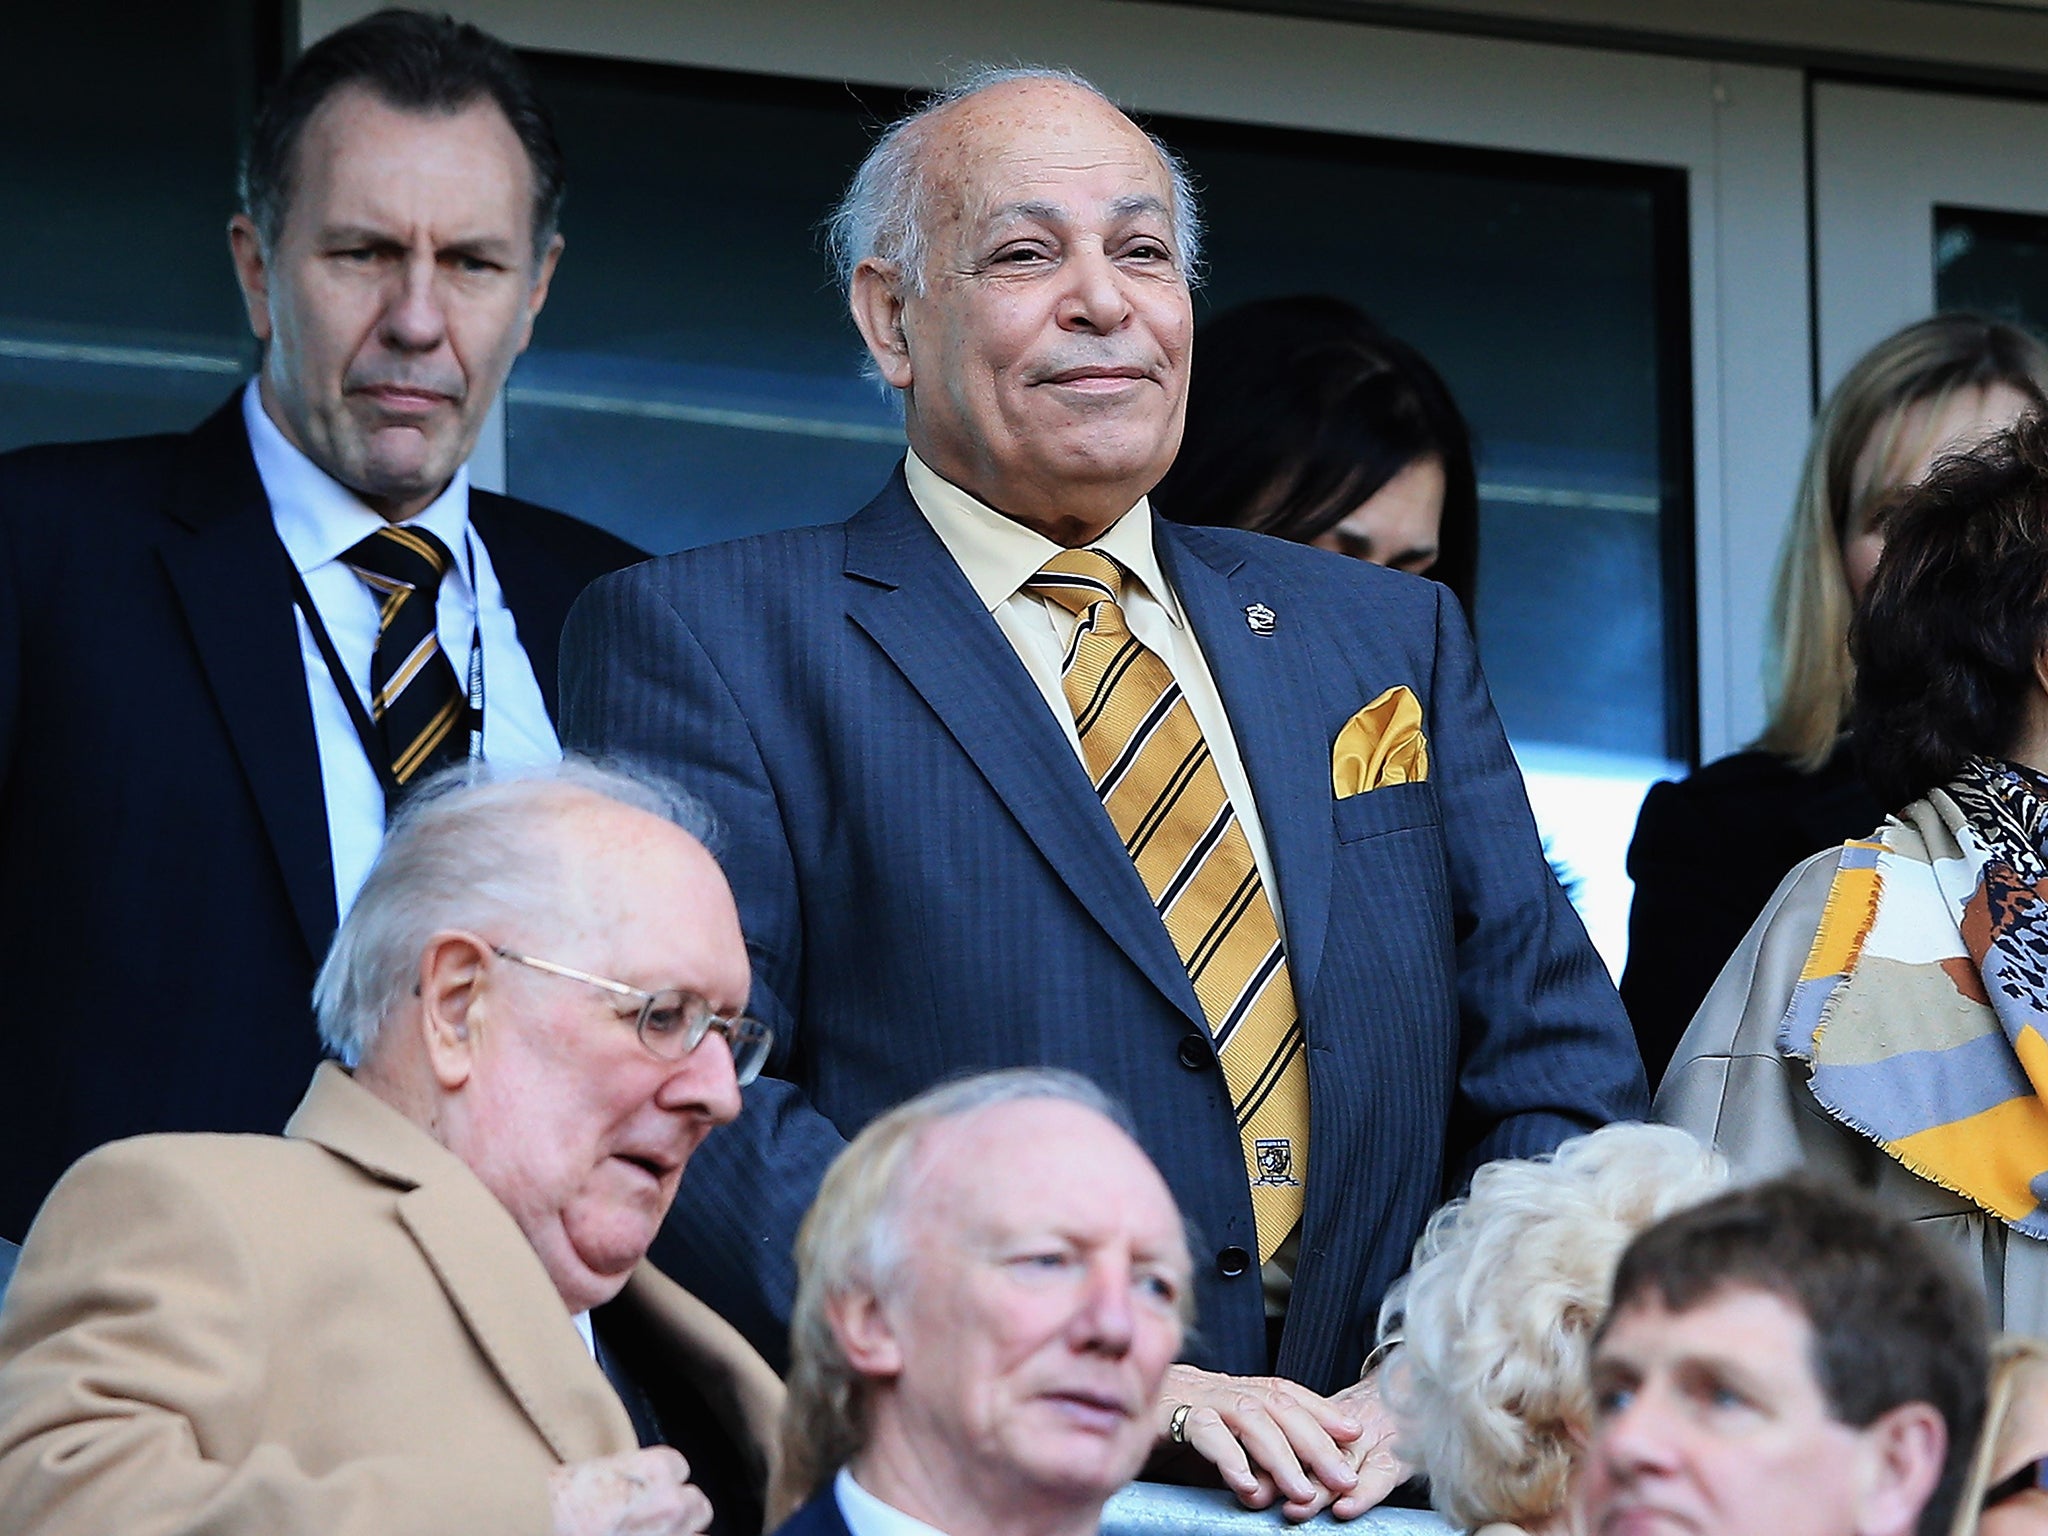 Assem Allam put Hull City on the market in April